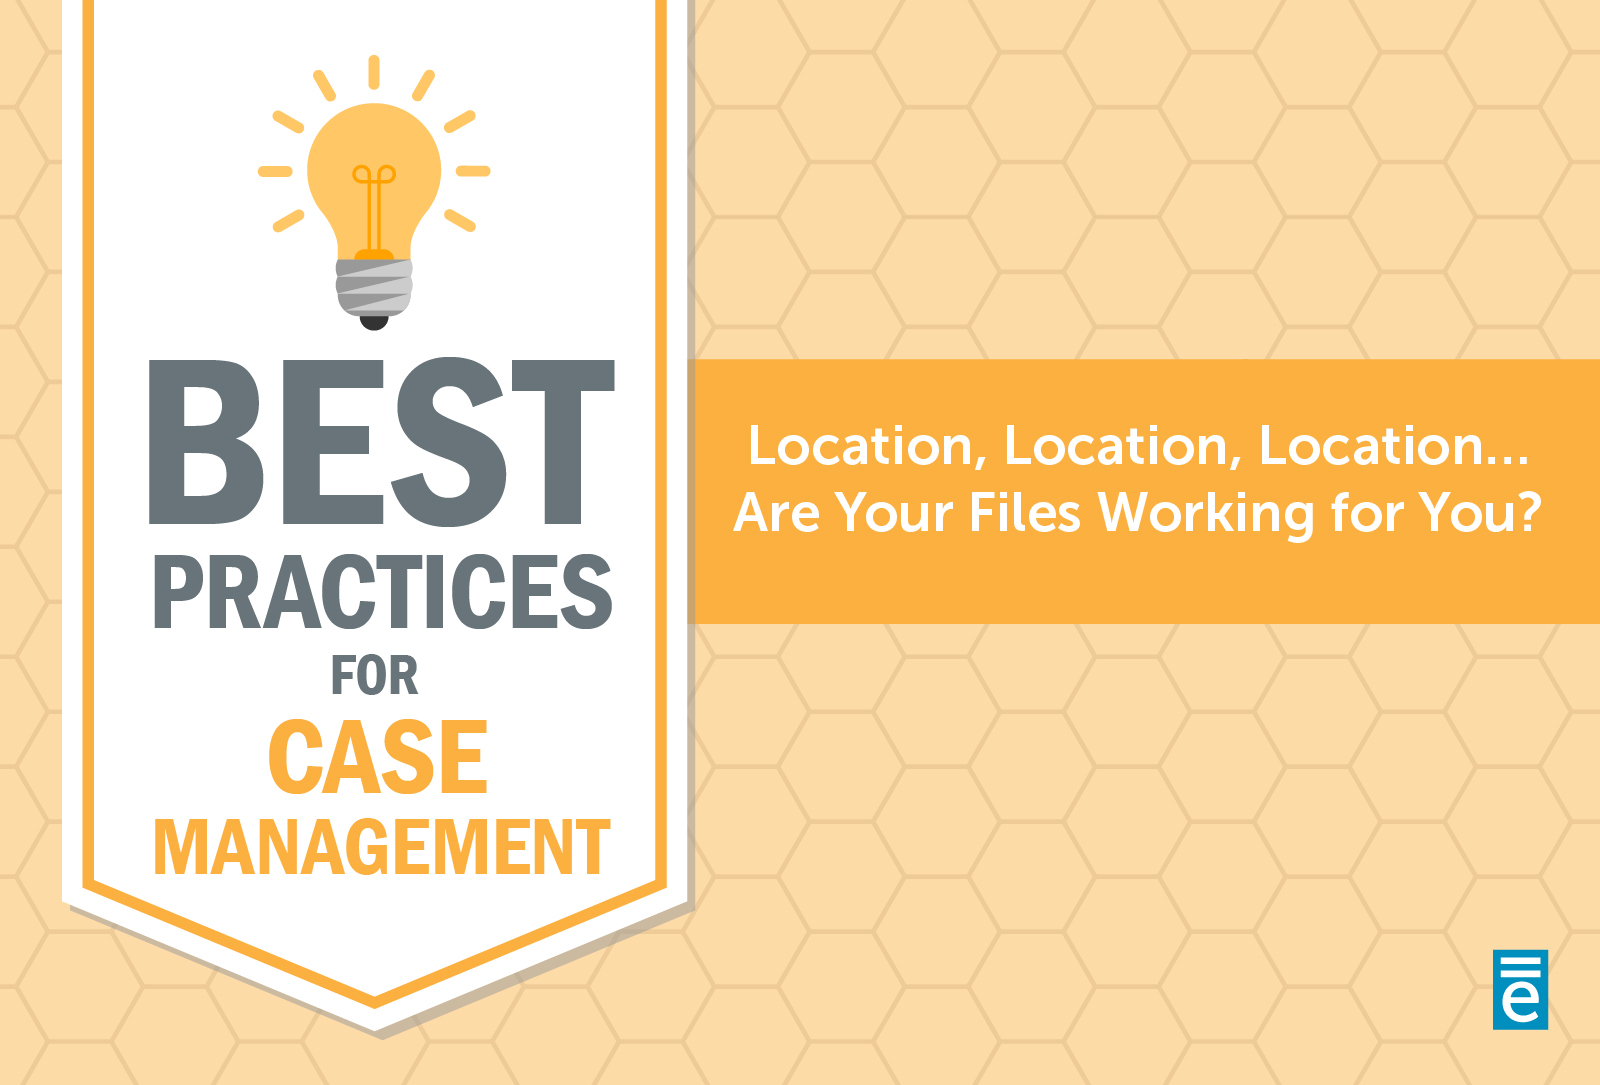 Location, Location, Location … Are Your Files Working for You?